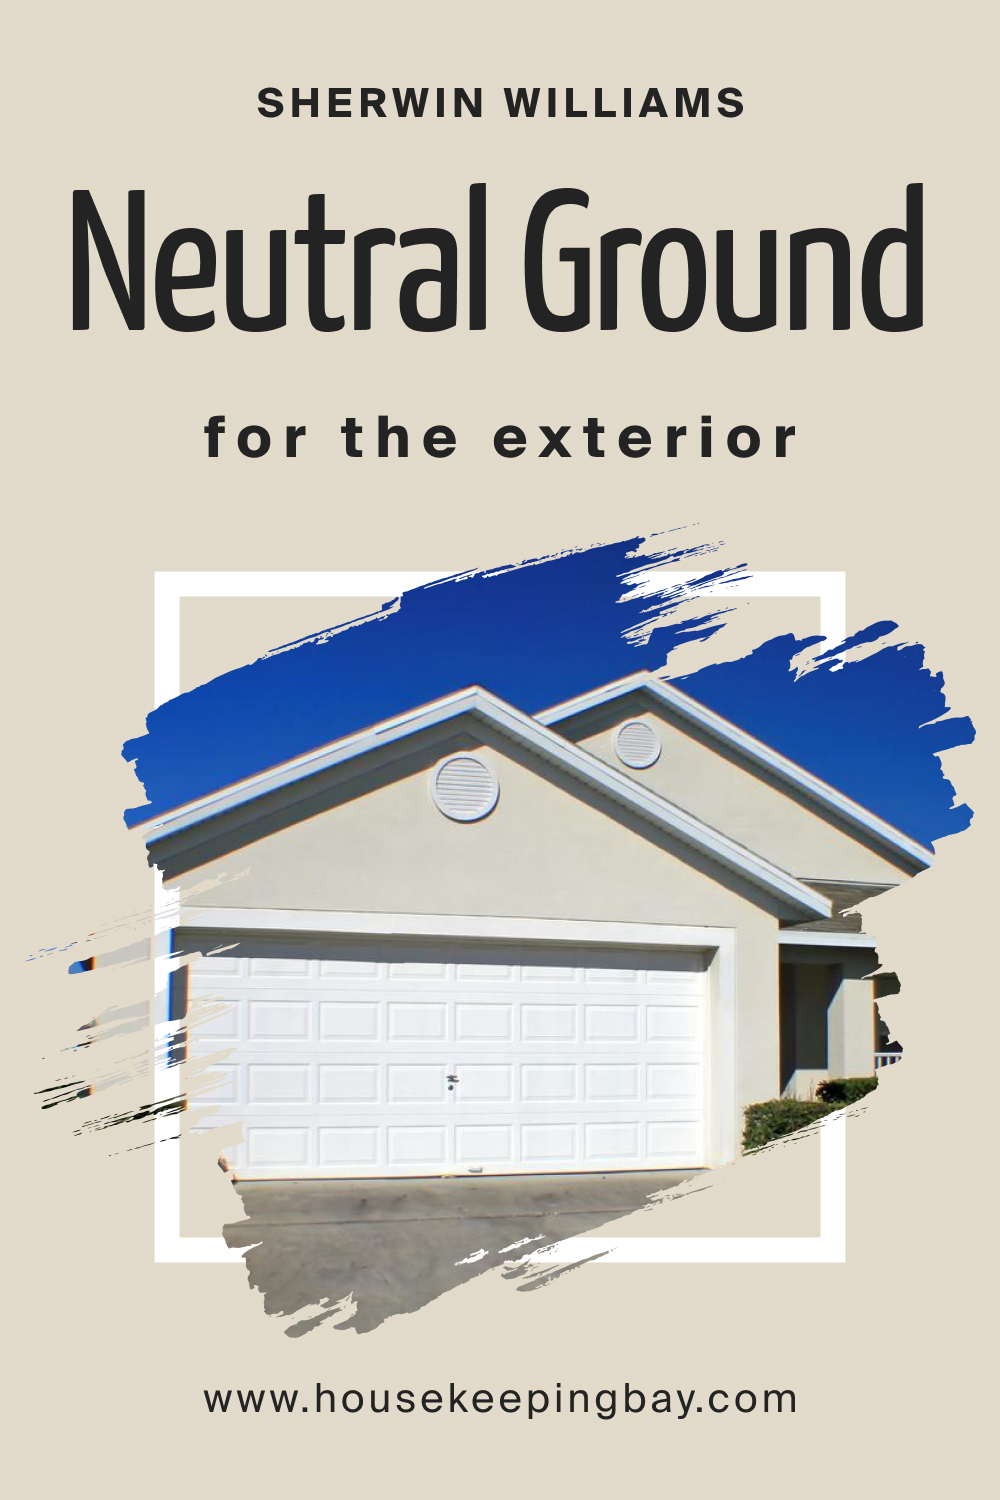 Sherwin Williams. Neutral Ground For the exterior